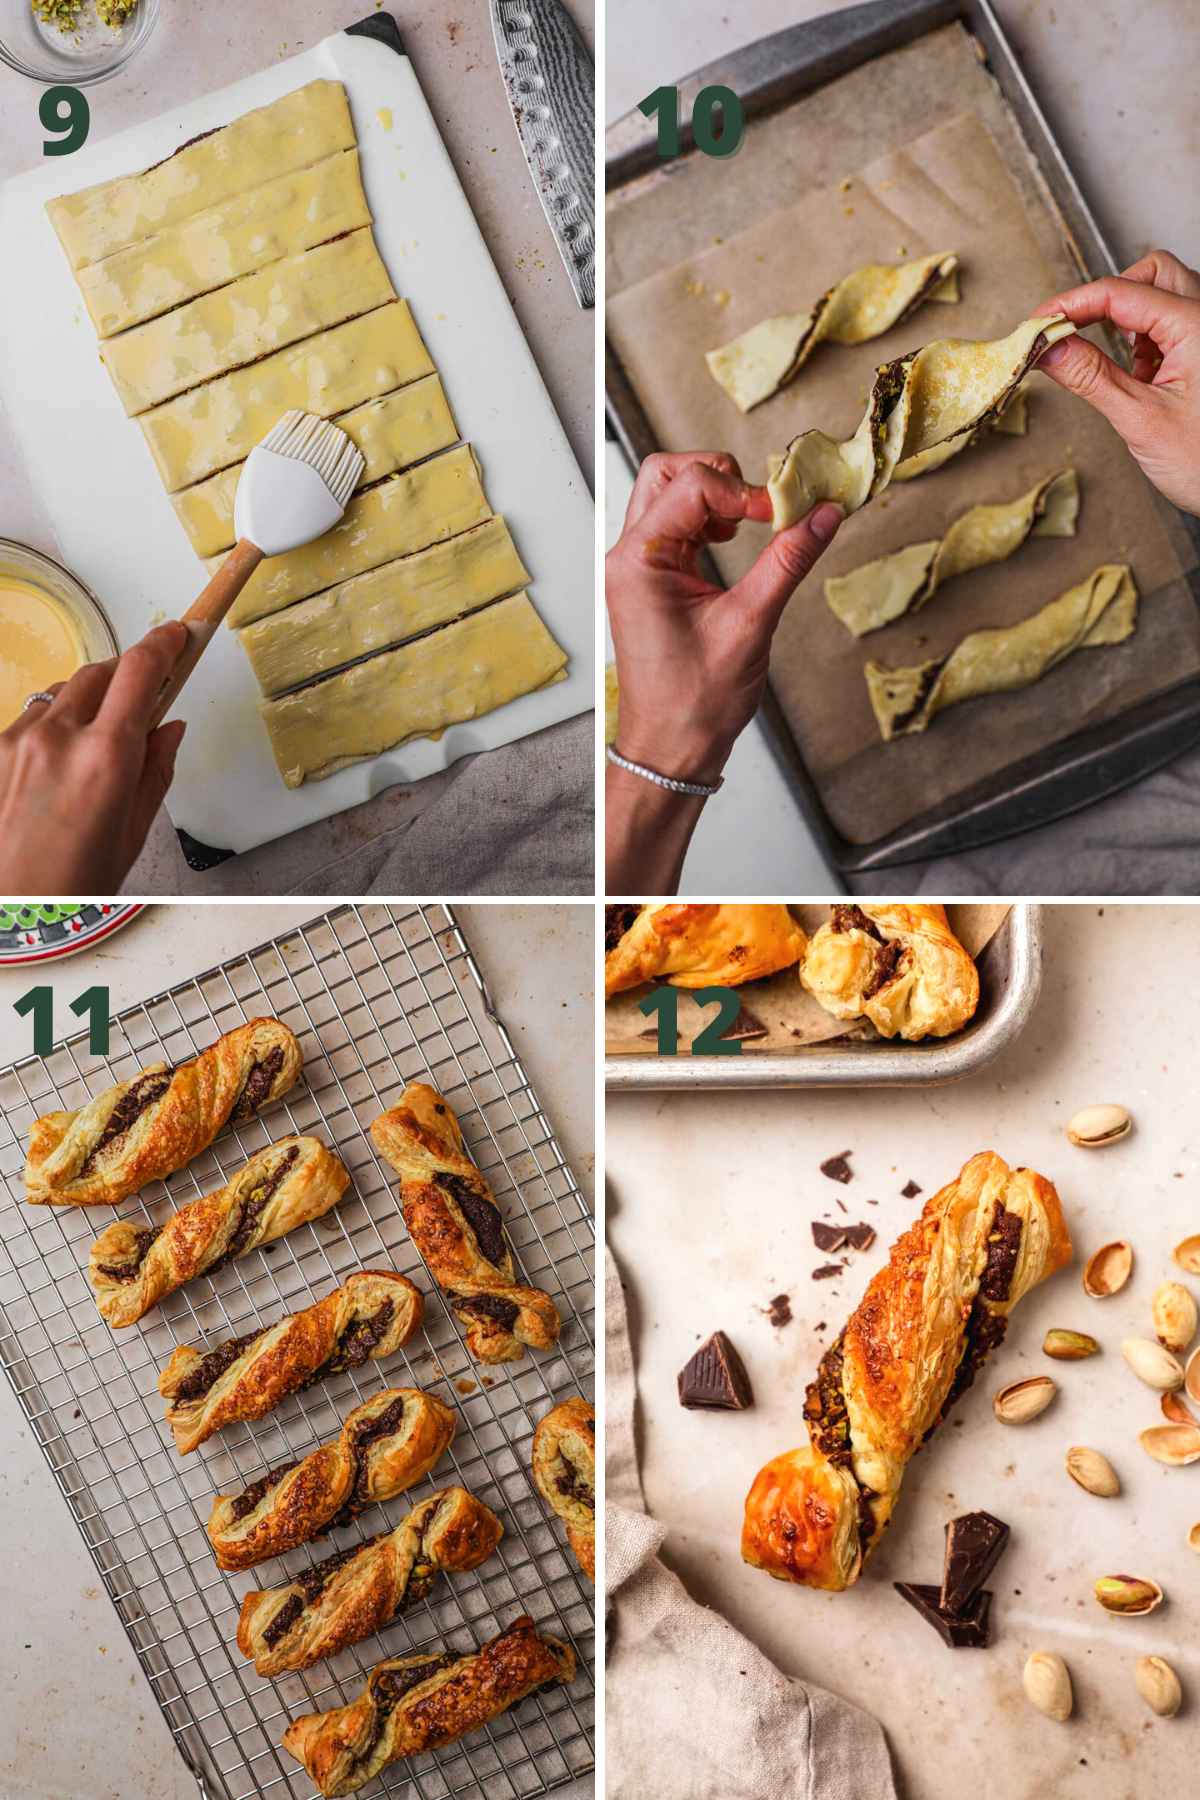 Steps to make chocolate twists, brush puff pastry with egg wash, twist strips, bake, cool, and enjoy.